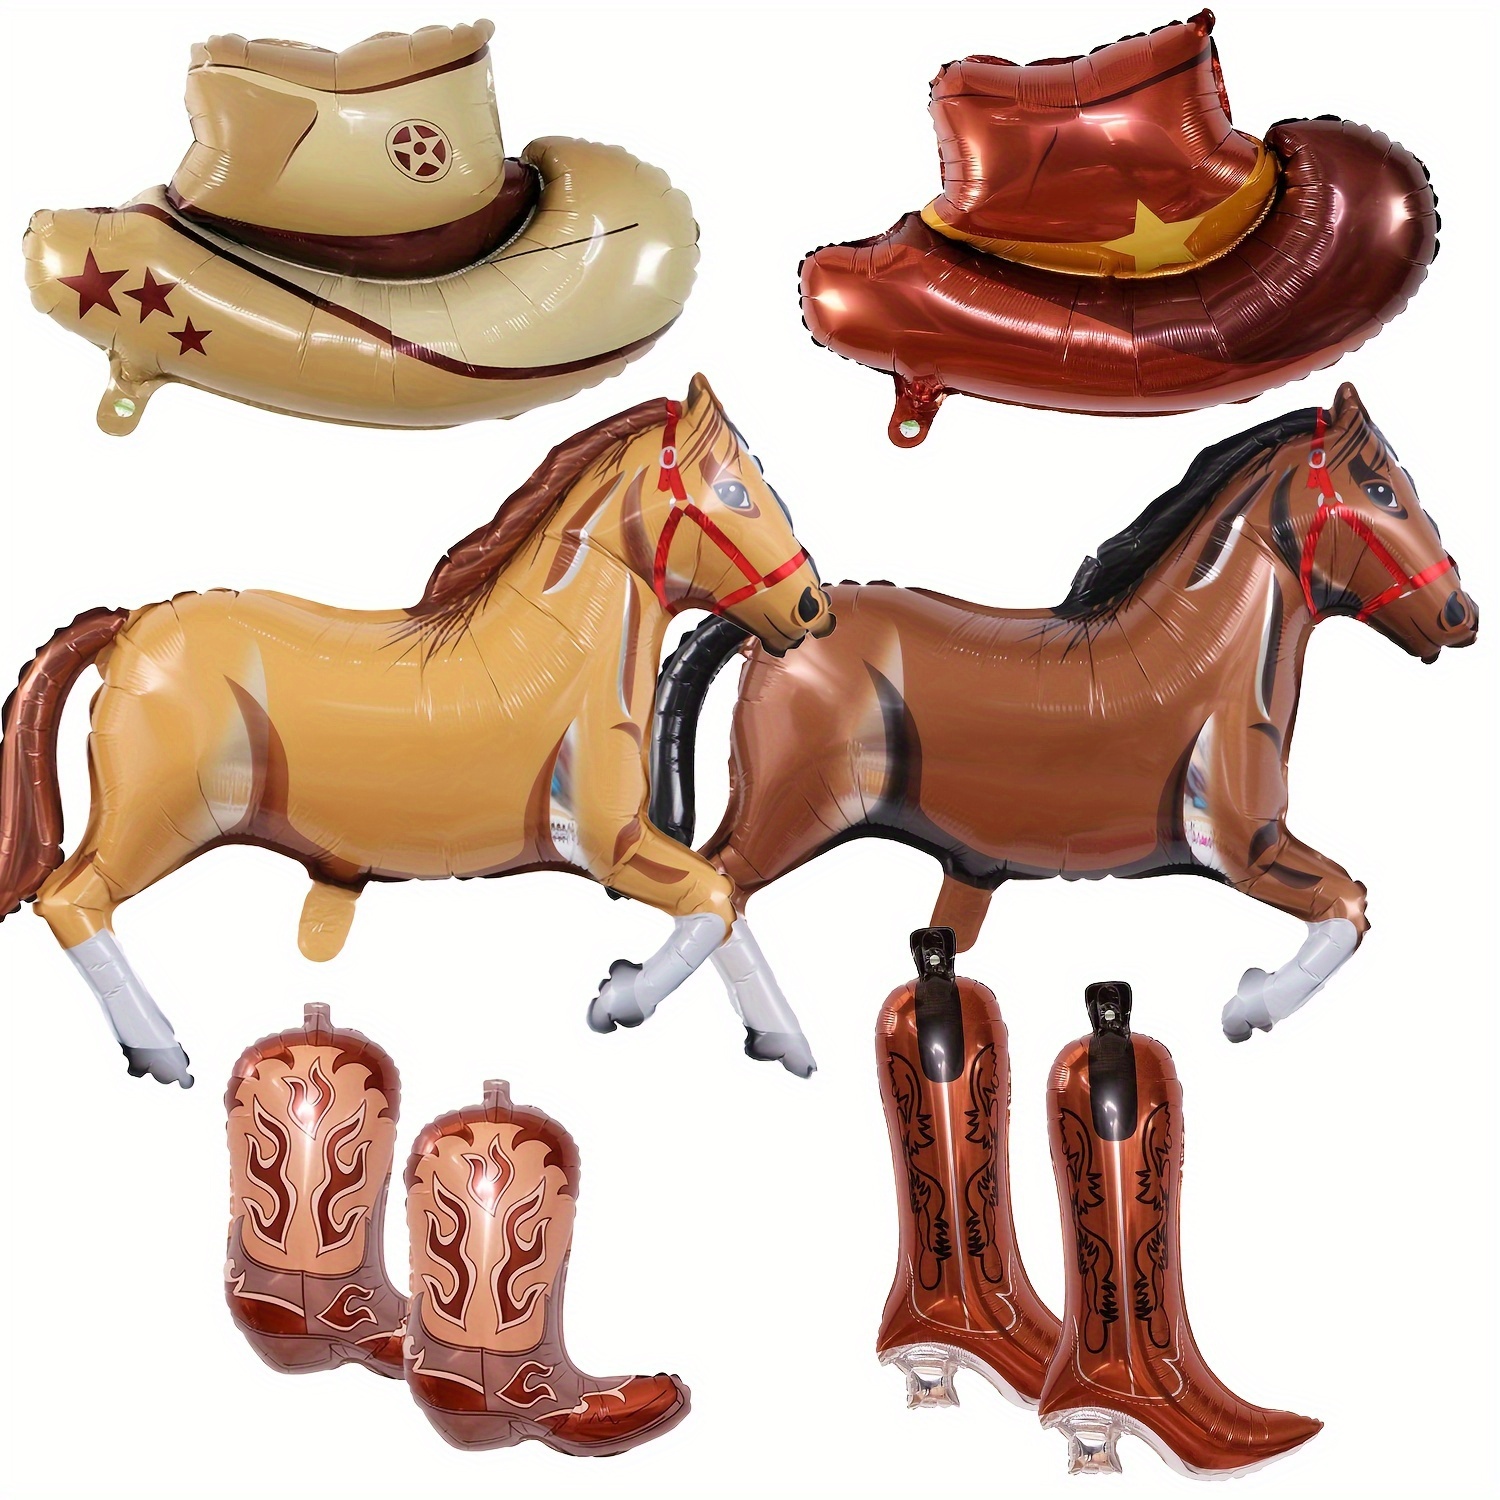 

8-piece Western Party Balloon Set - Large Brown Cowgirl Boot & Hat Foil Balloons For Birthdays, Bachelorette Parties, Rodeos & Farmhouse Celebrations